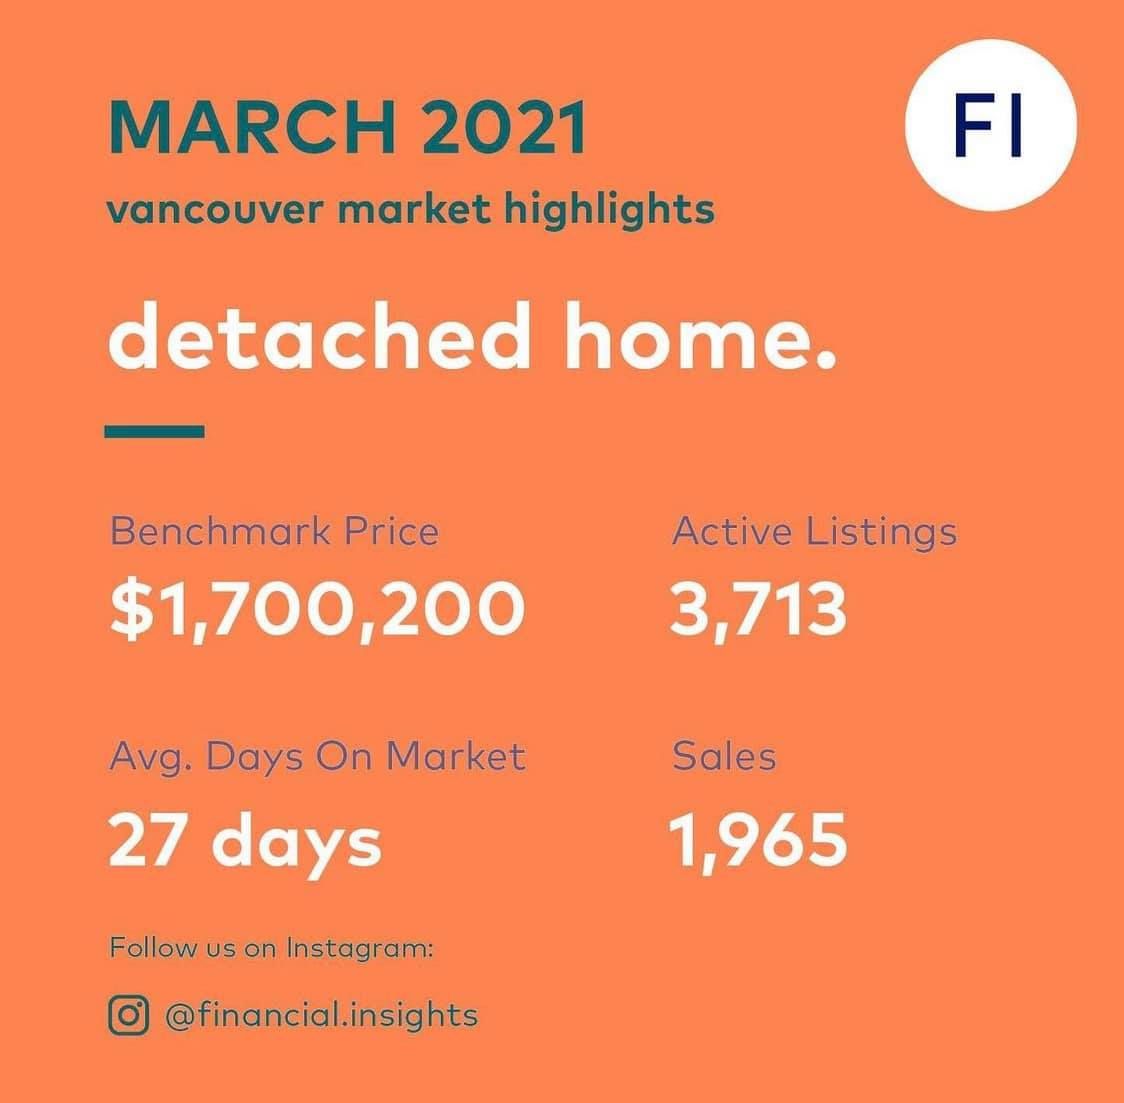 Detached homes for March 2021